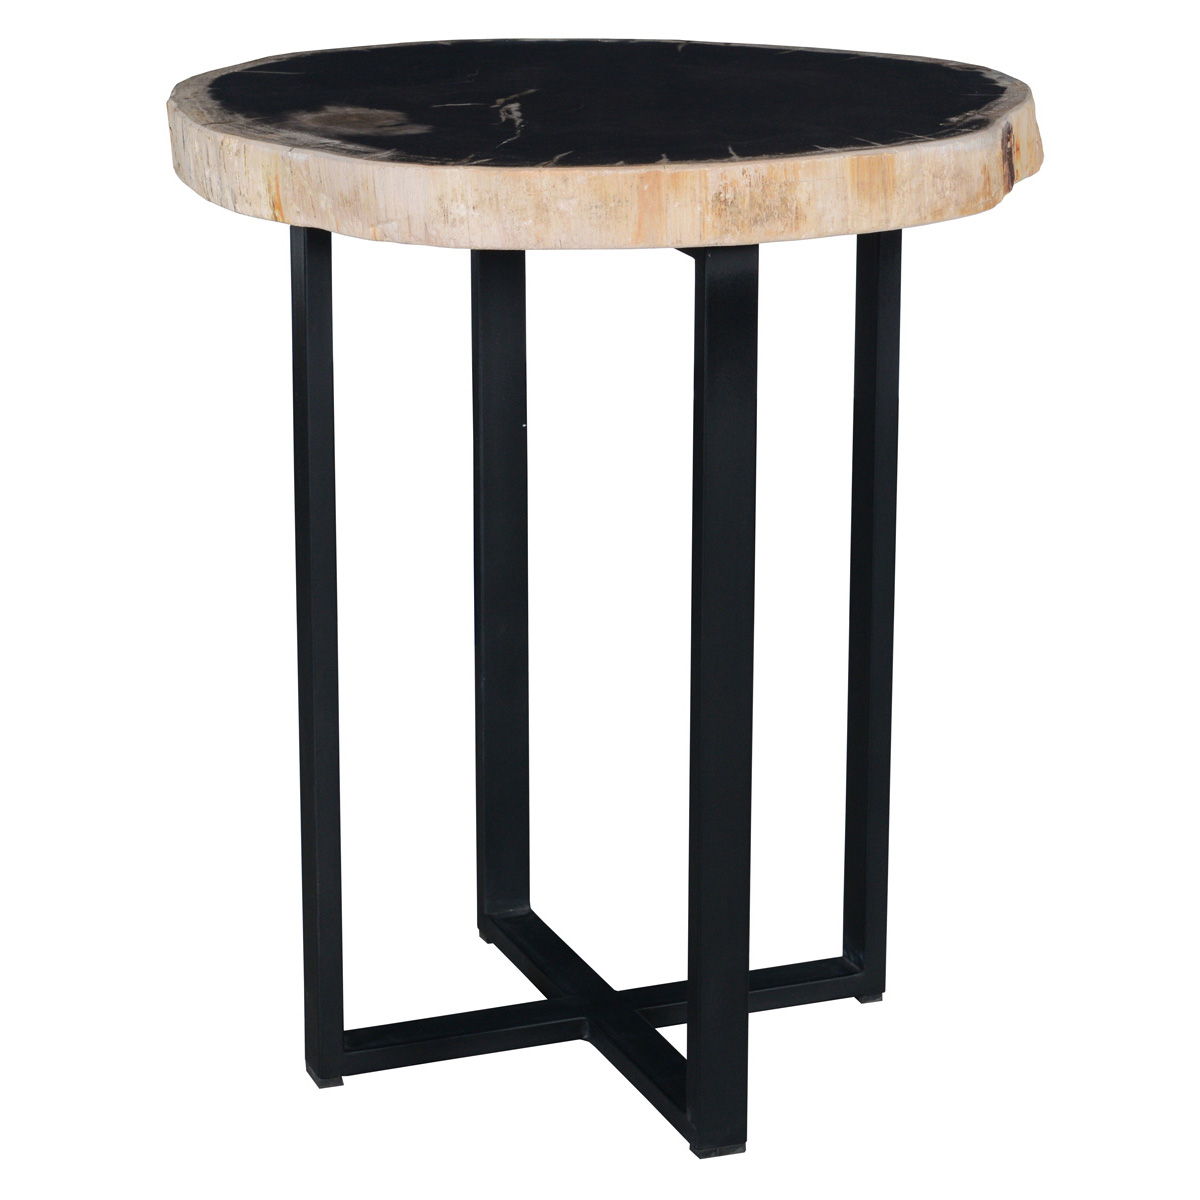 Merlin - Accent Table - Black & White